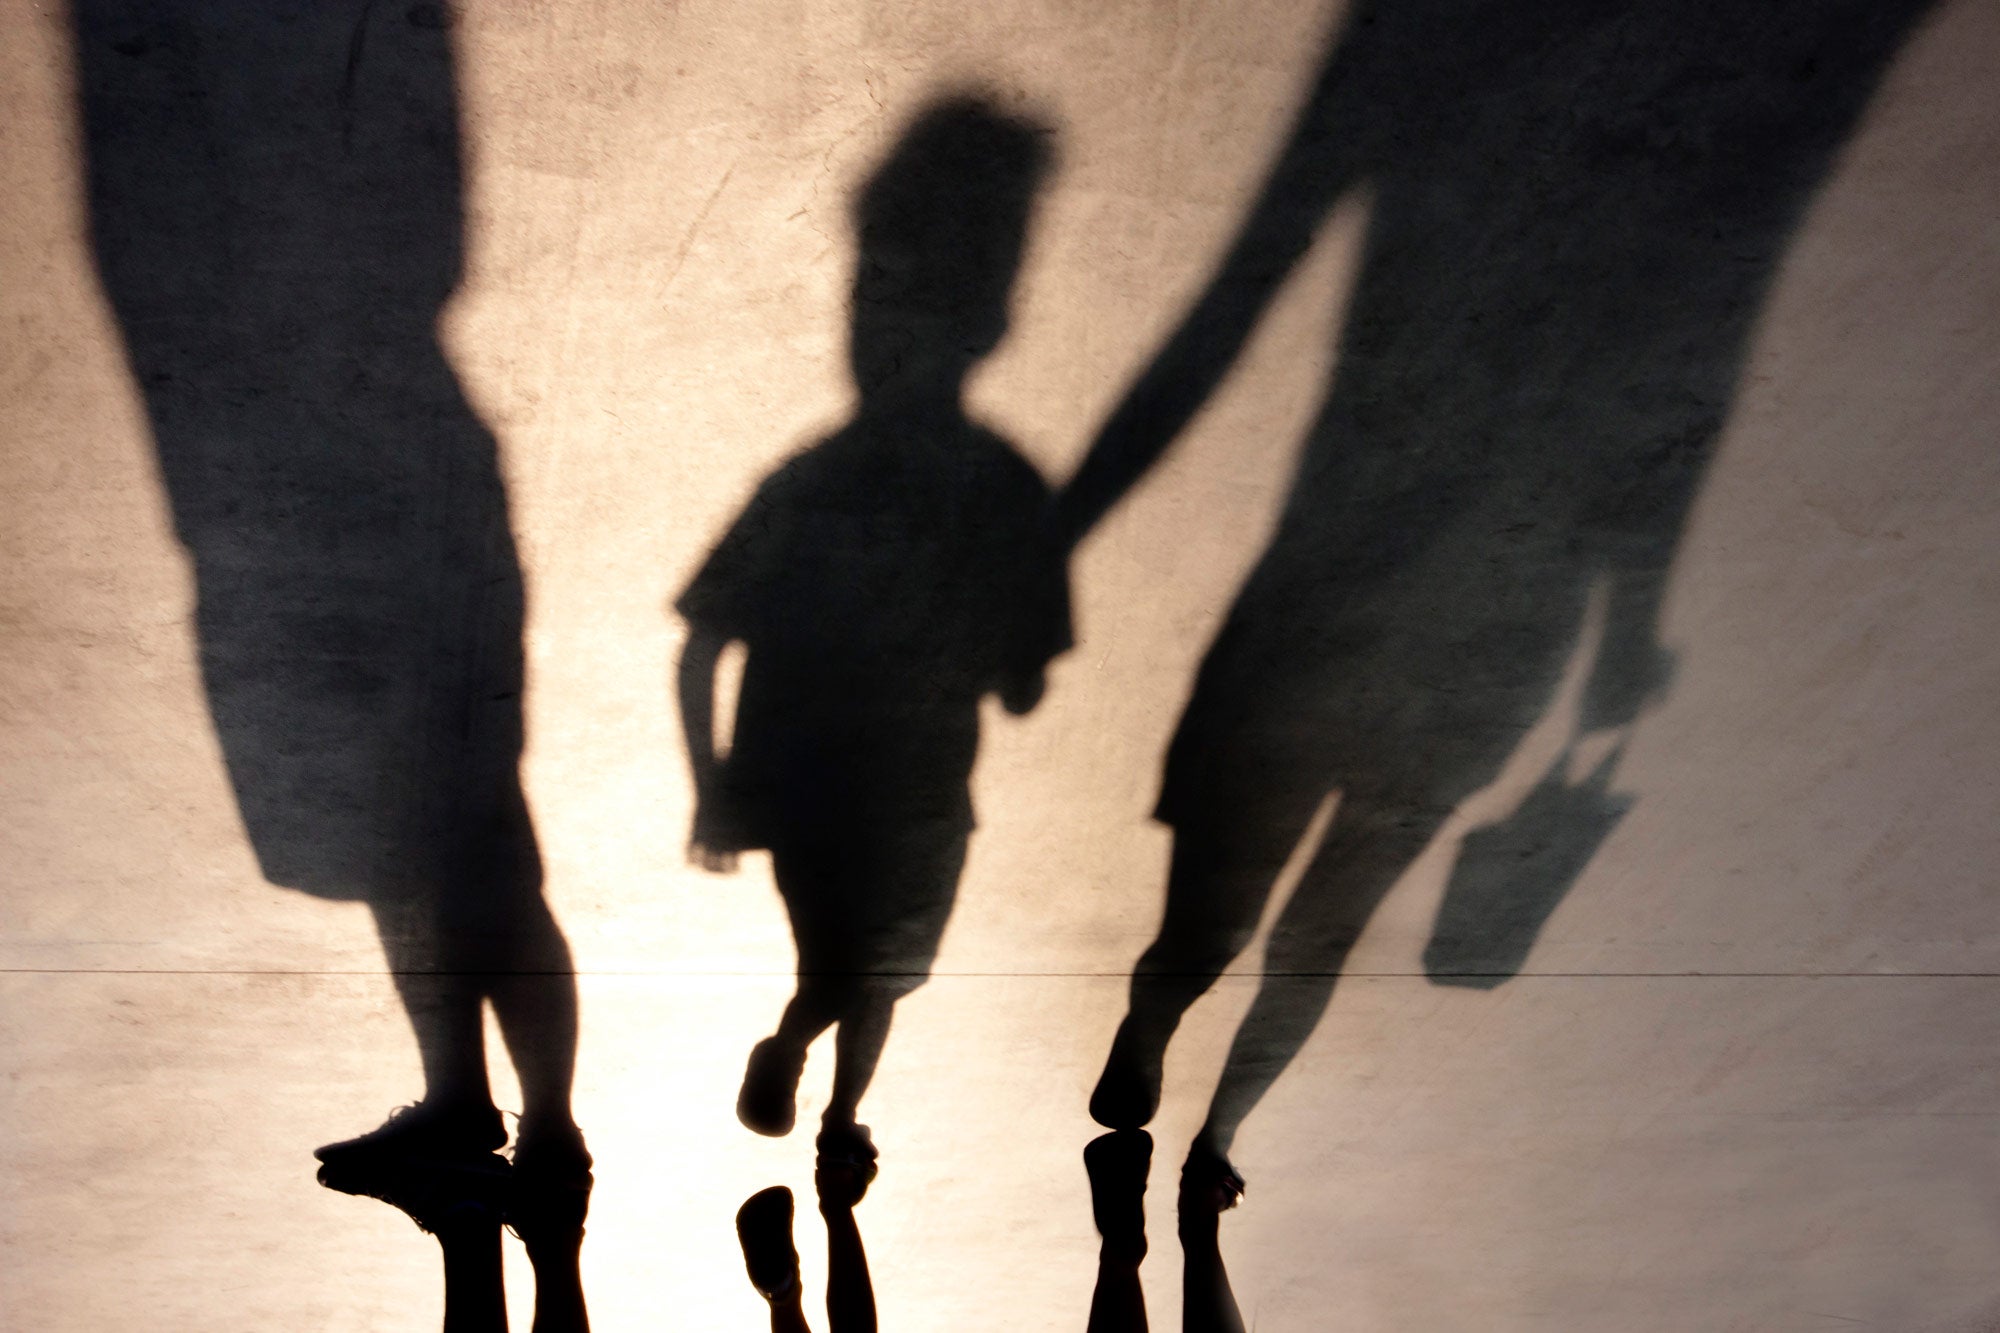 Shadows of a family being separated by parental alienation. A silhouette of a family of three with a young child or toddler holding the hand of one of the parents and being led away by them. 